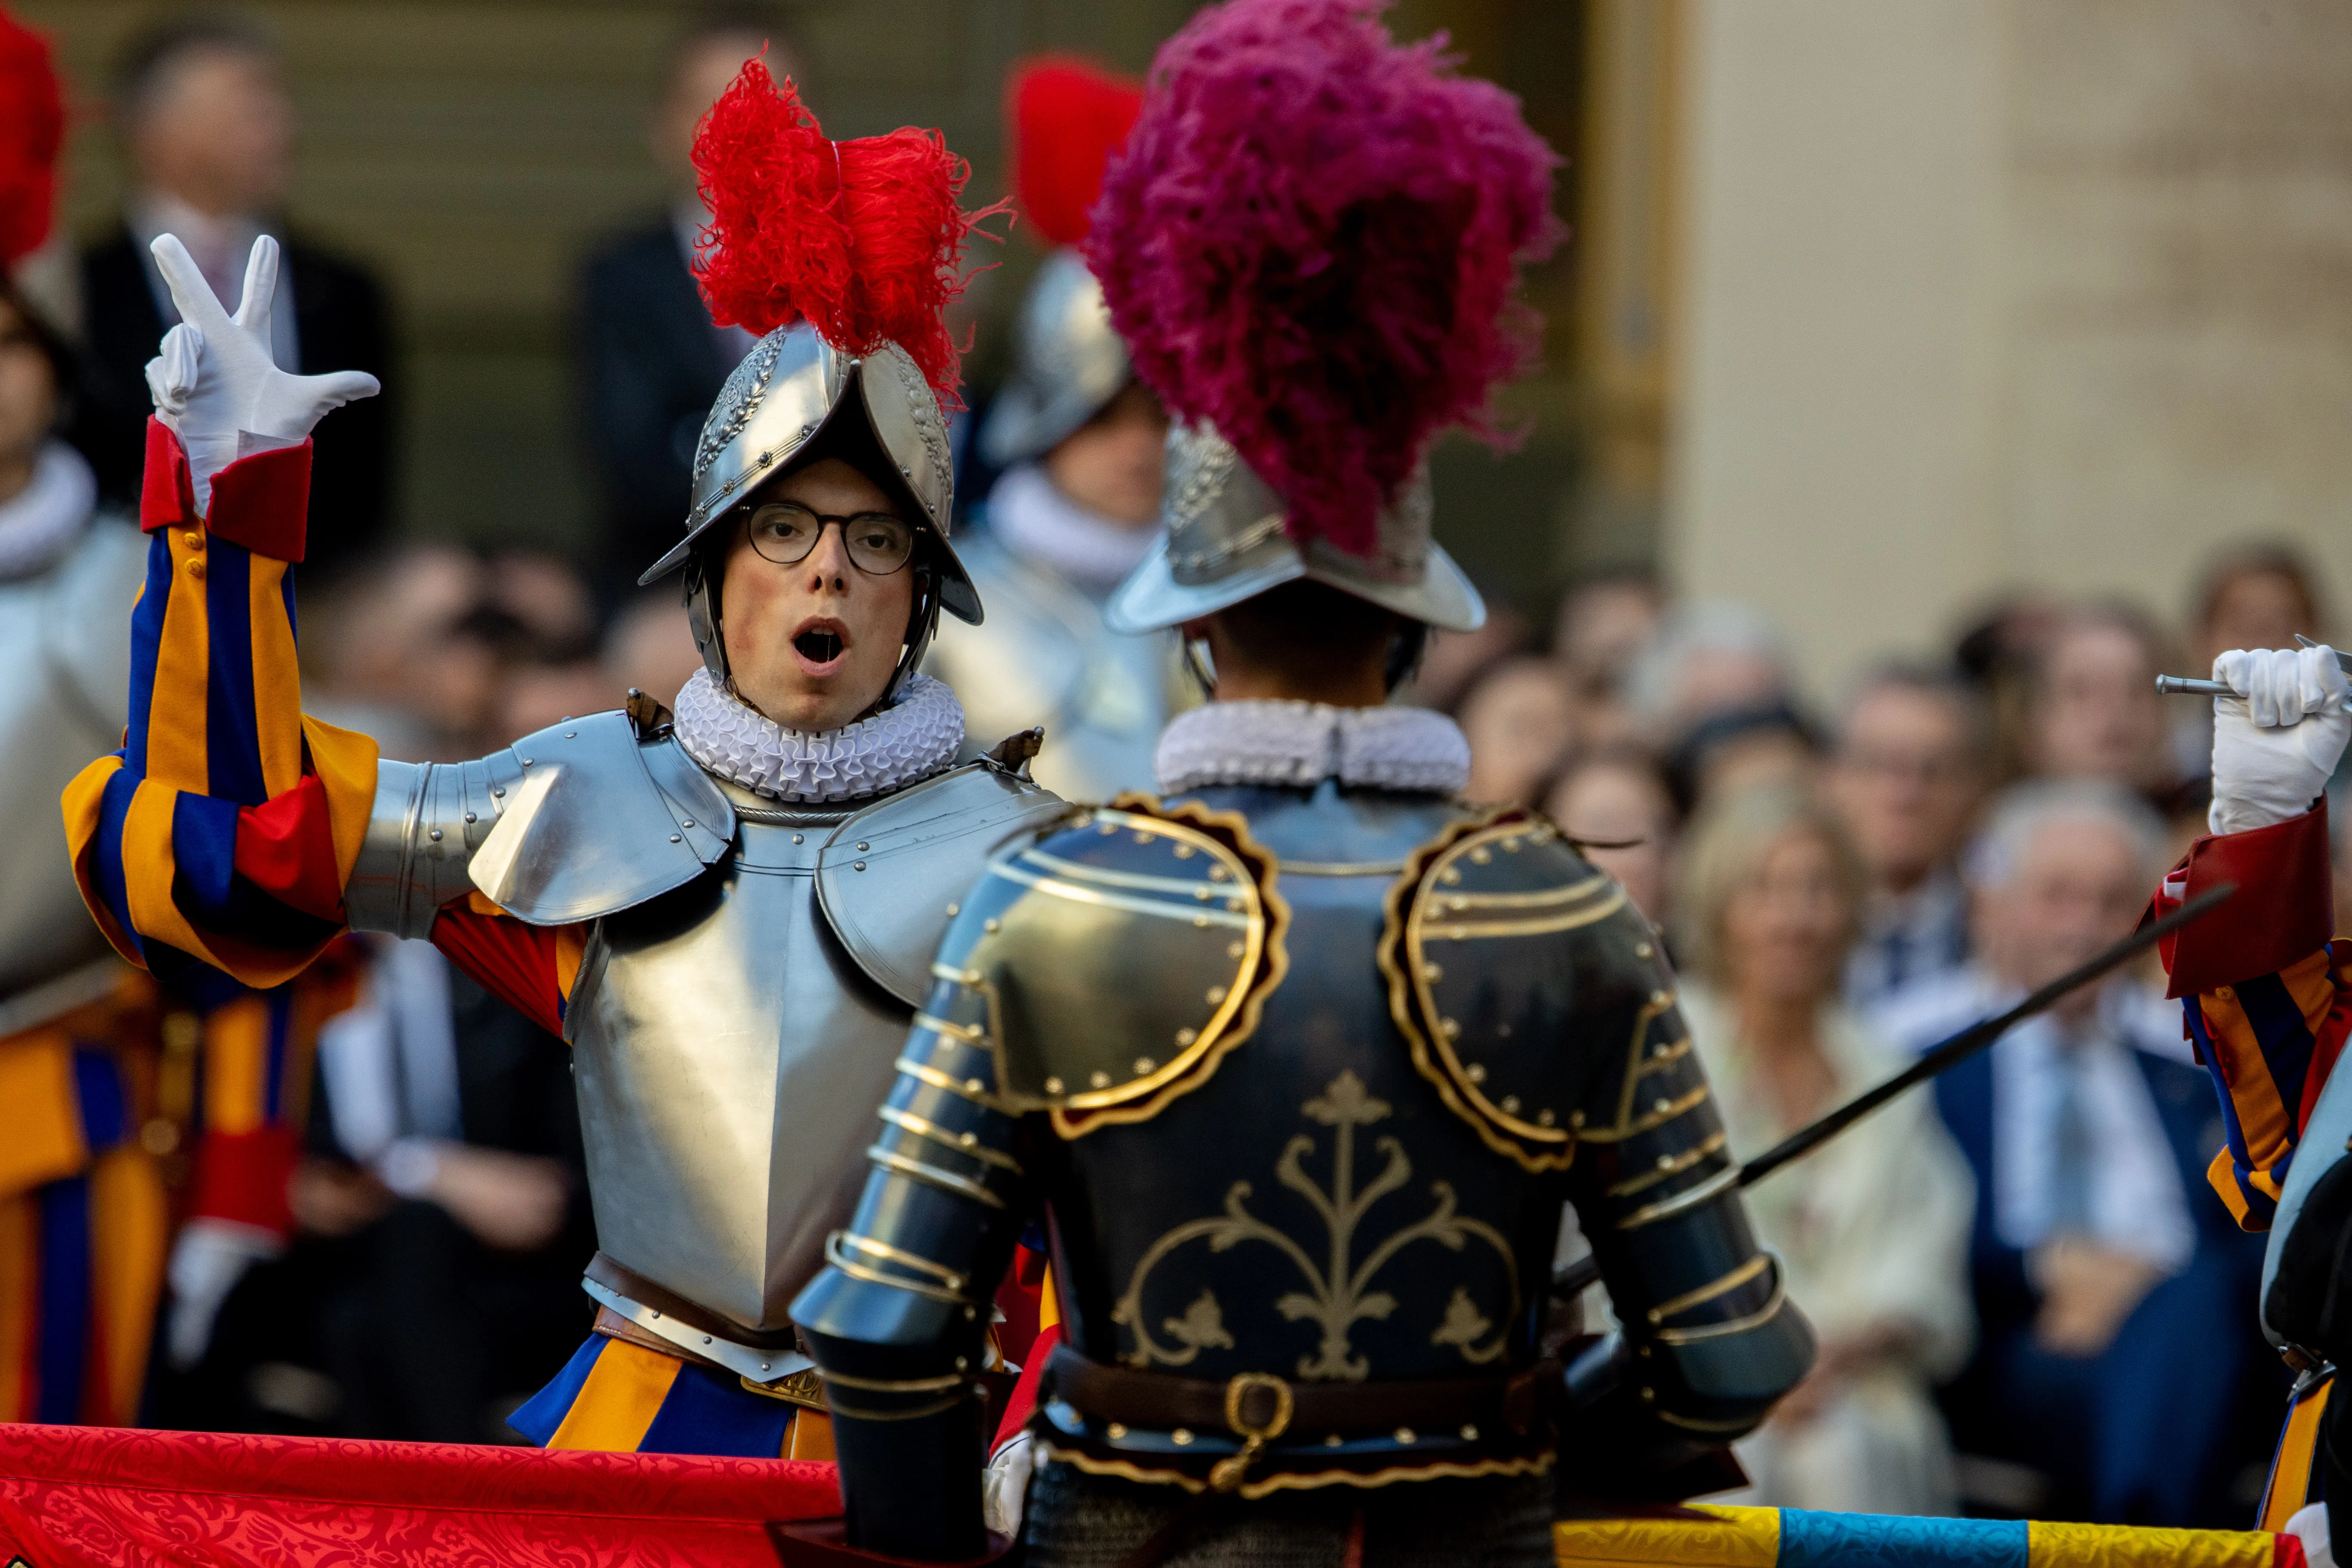 A new Swiss Guard swears to protect the pope, even sacrificing his life if necessary, during a ceremony on May 6, 2023.?w=200&h=150